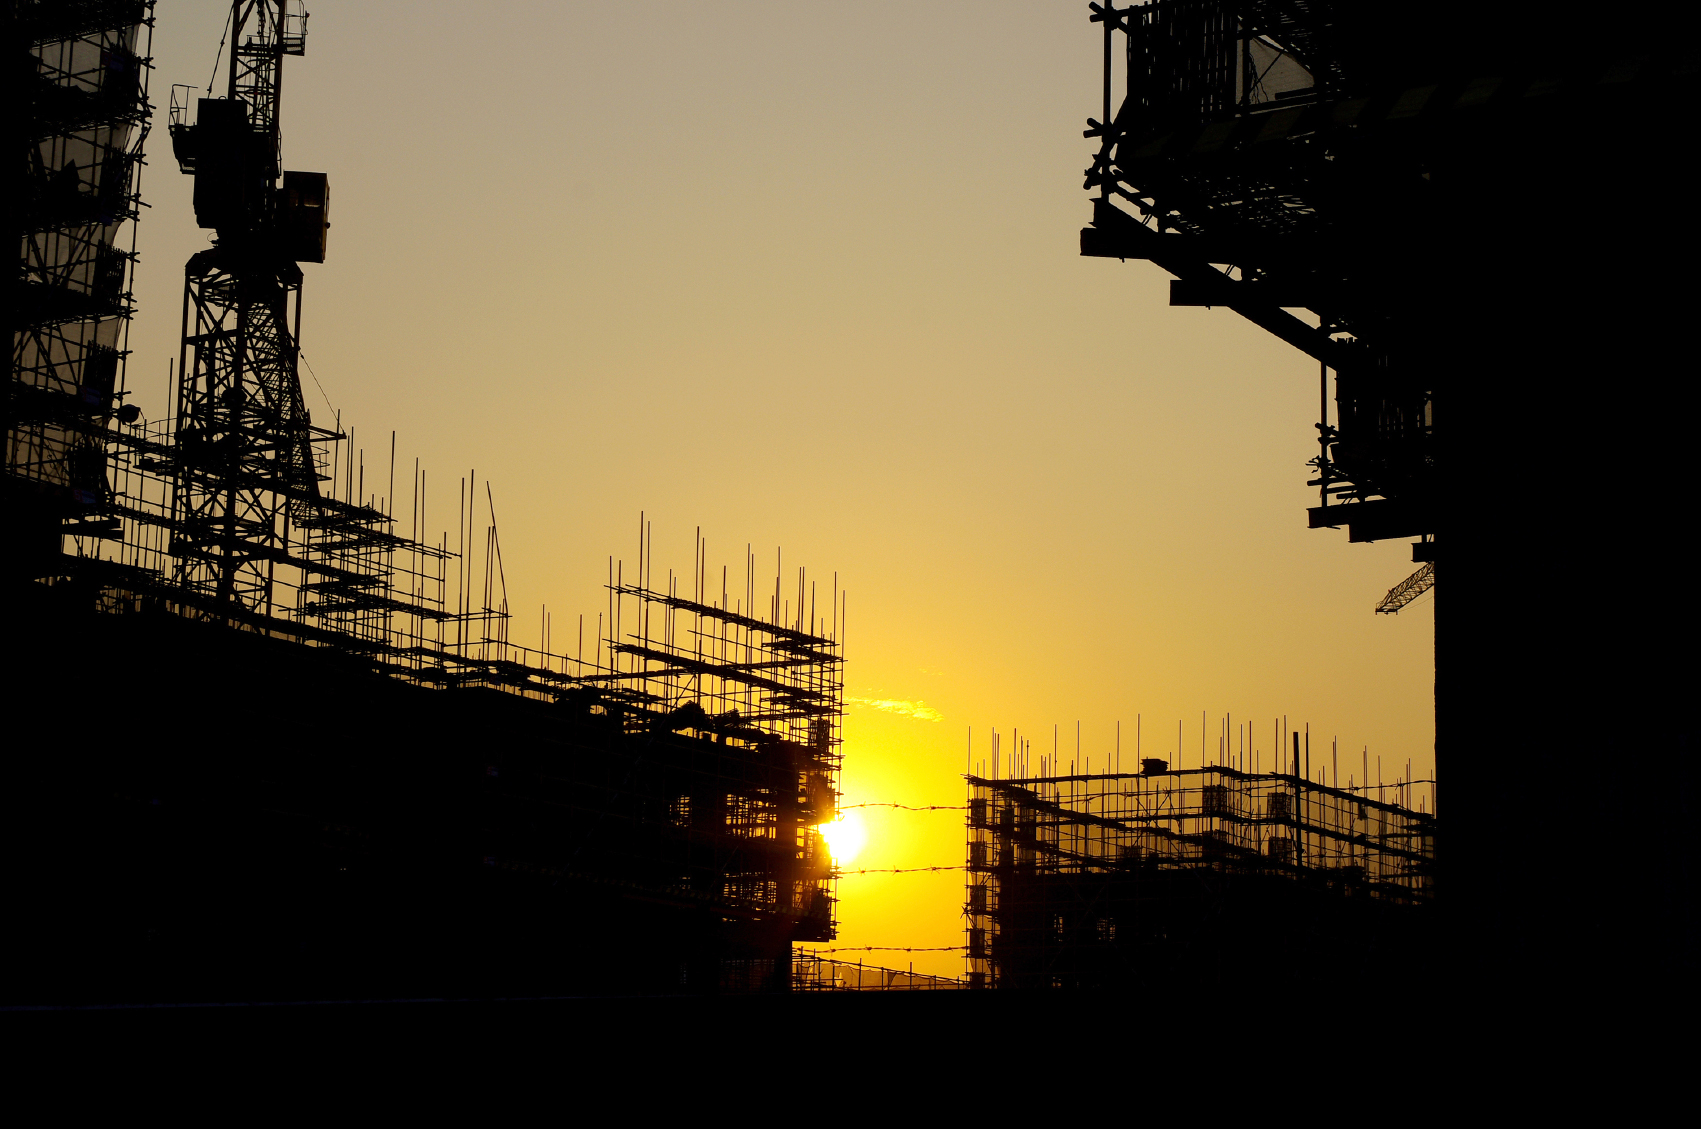 U.S. Annual Construction Spend Rate at $808 Billion in March - WORLD PROPERTY JOURNAL Global ...